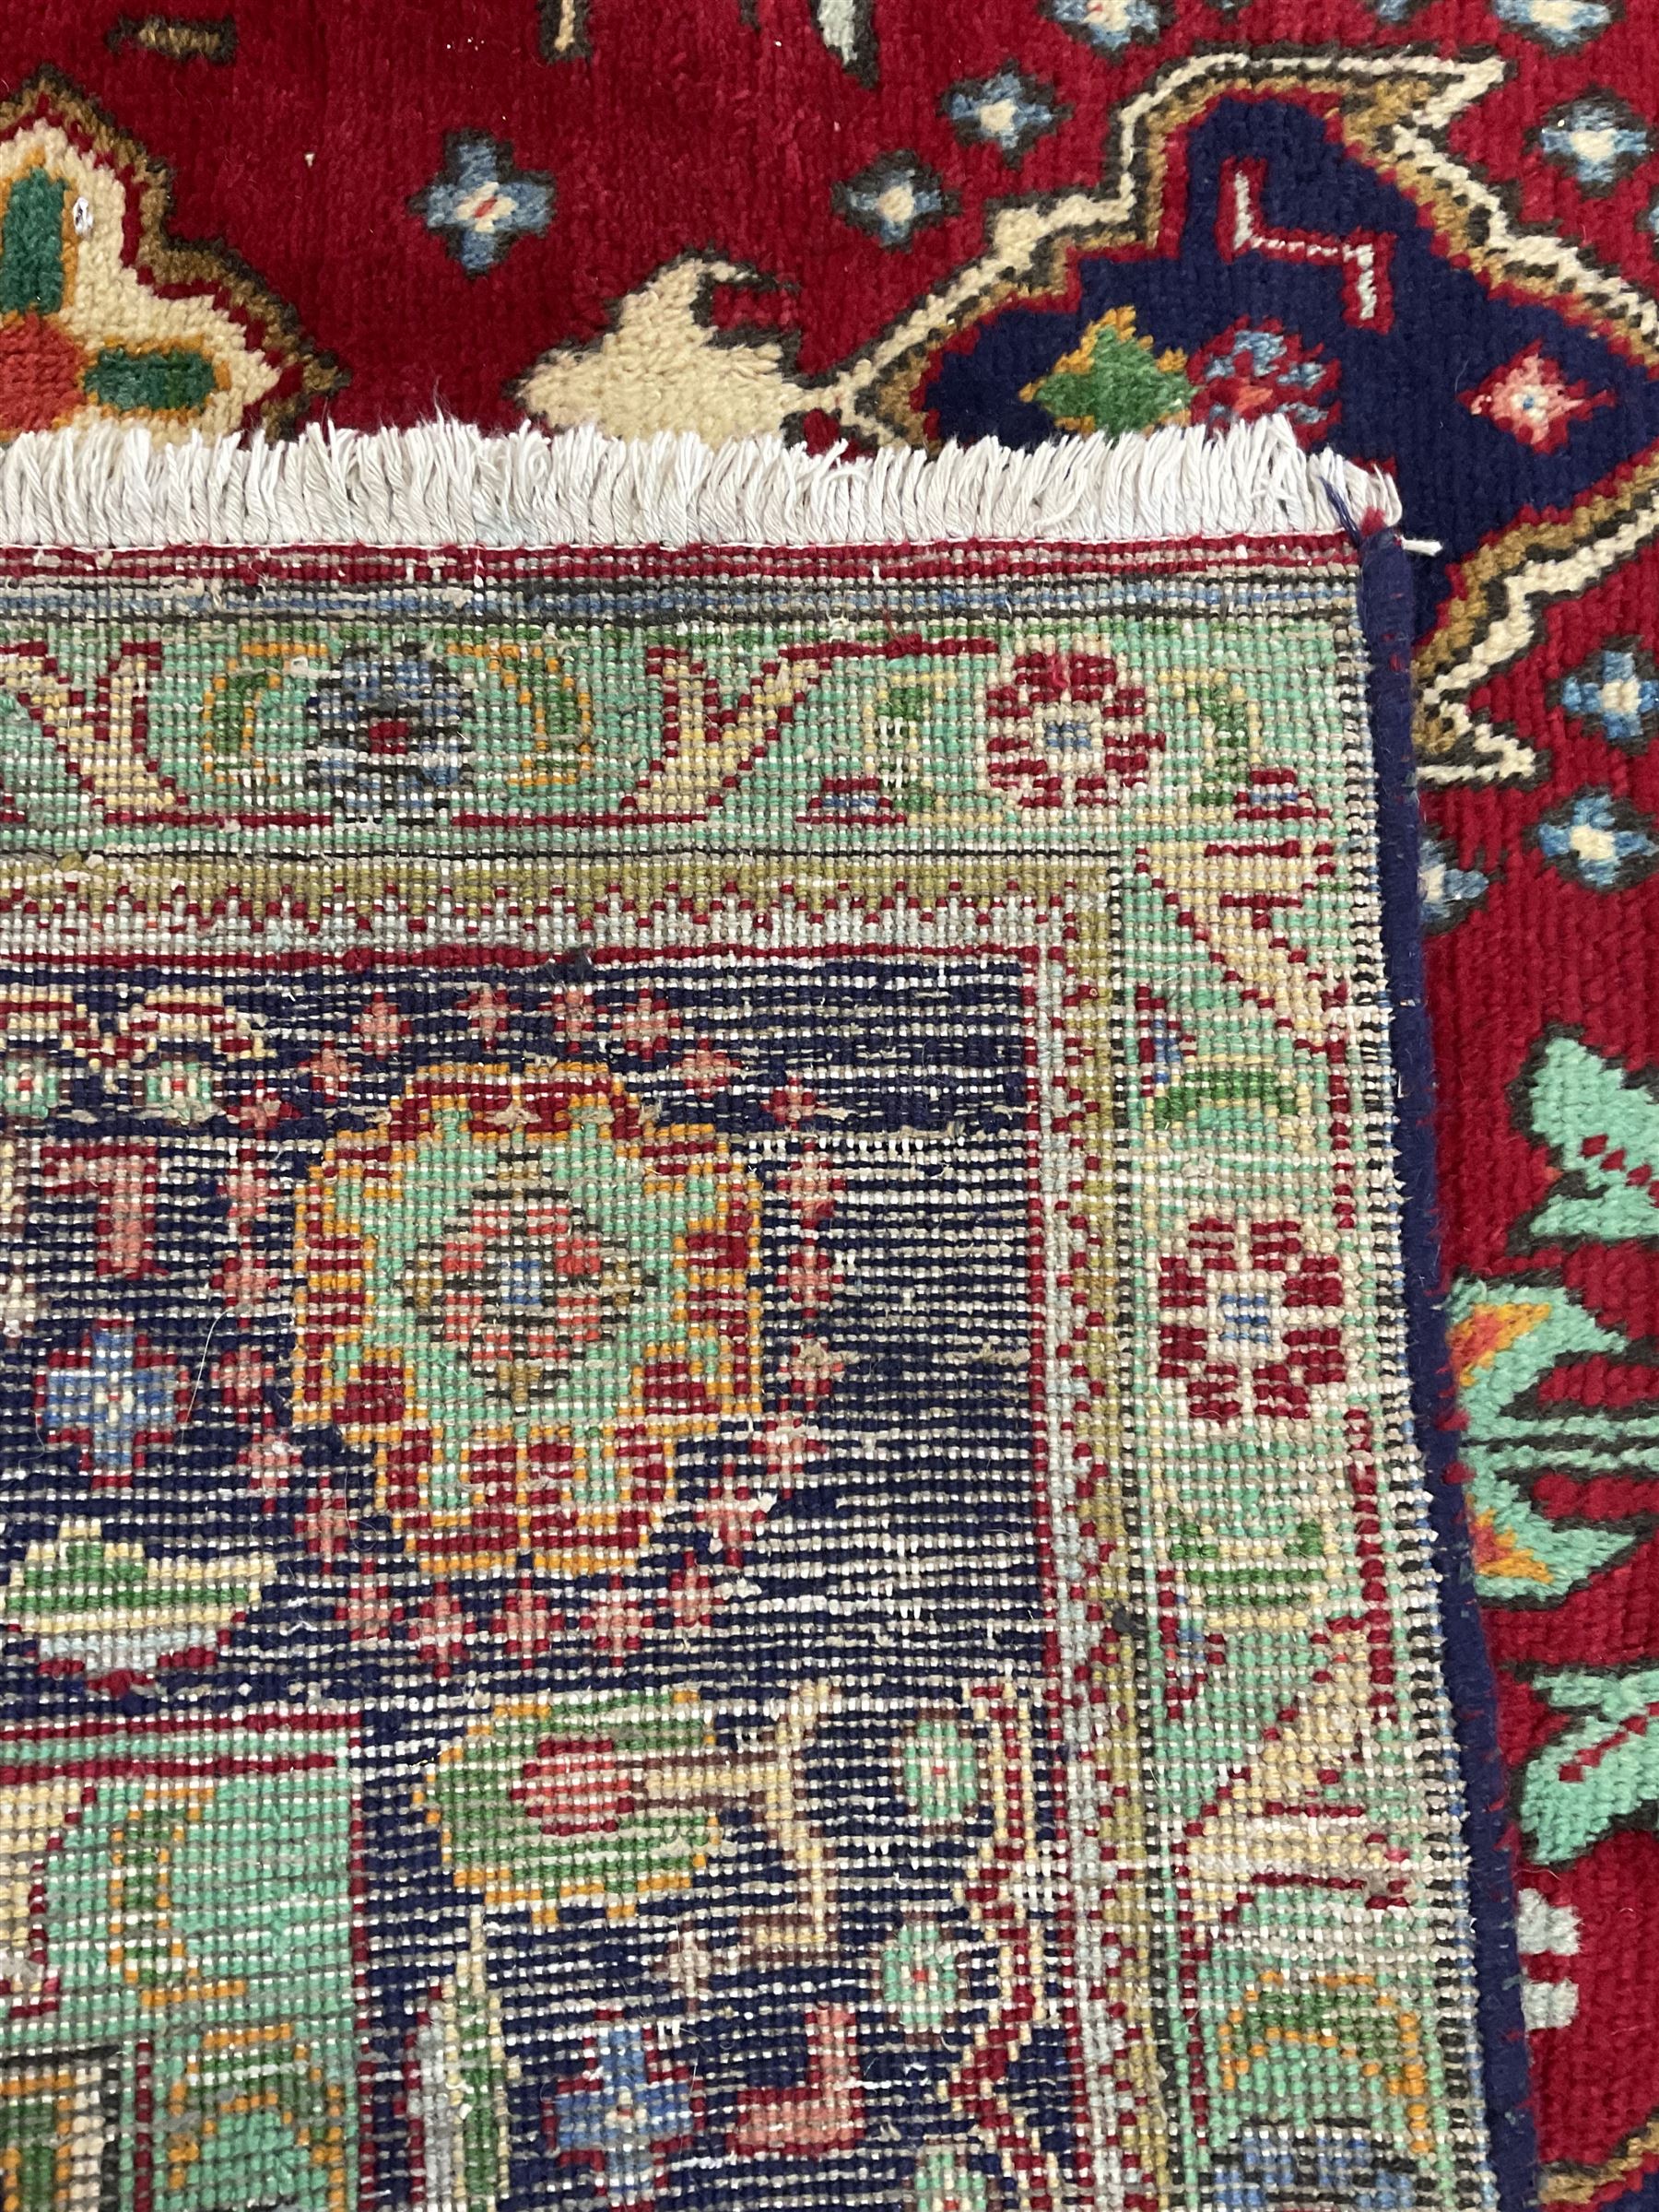 Qashqai red and blue ground rug - Image 3 of 4